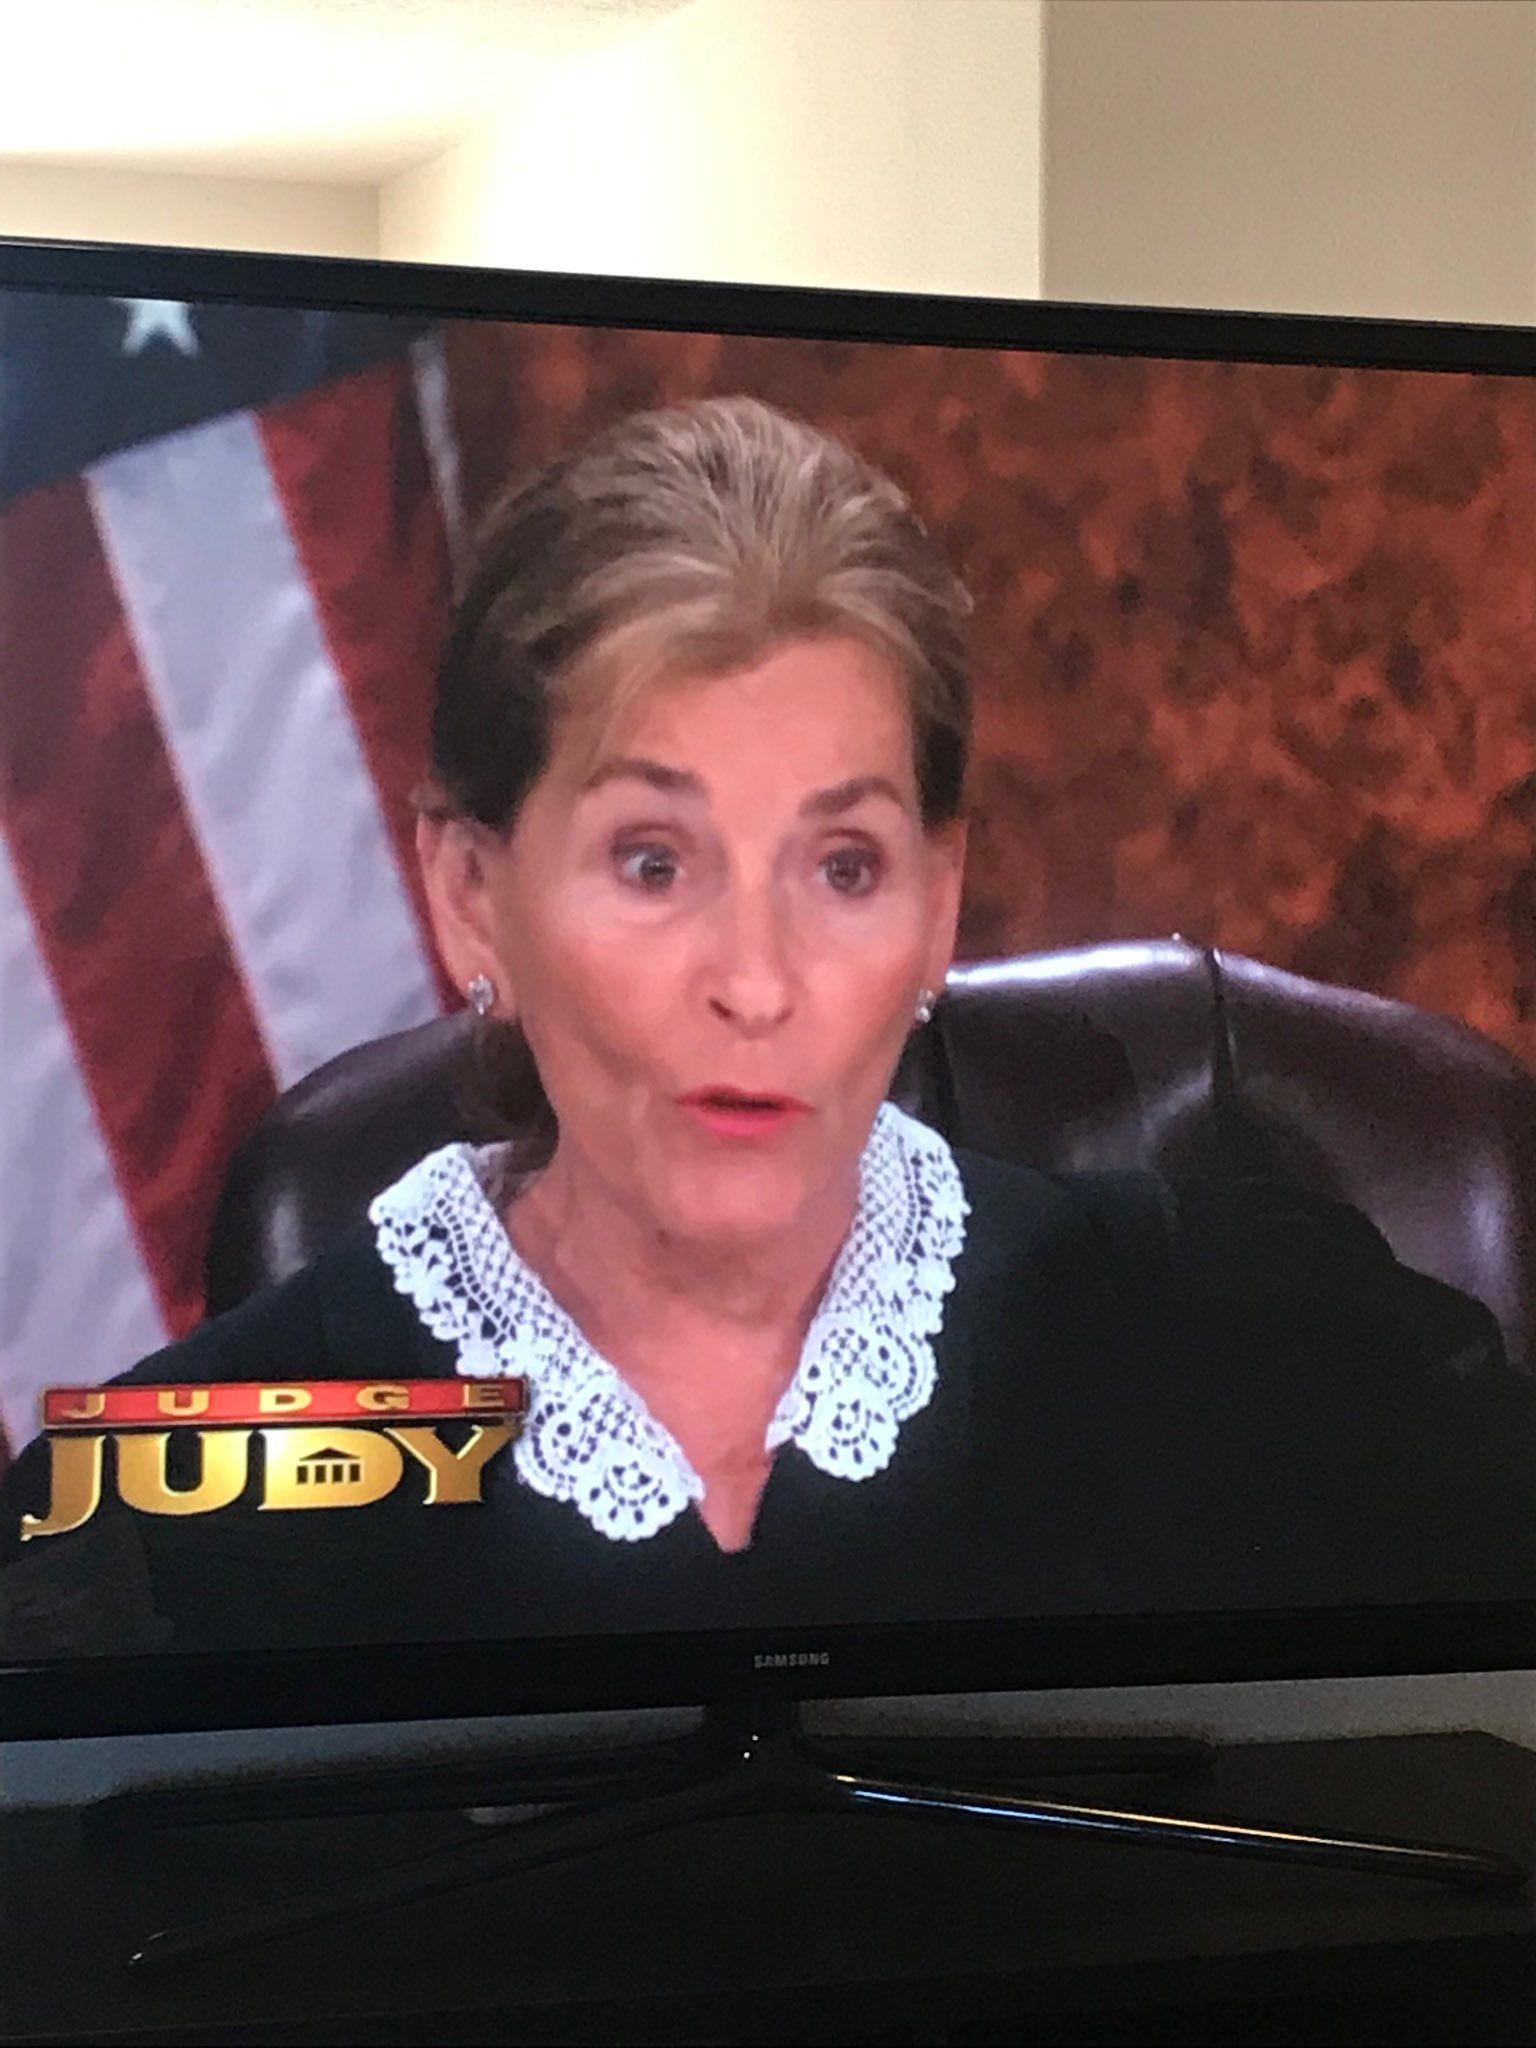 judge judy - page 2 - blogs & forums